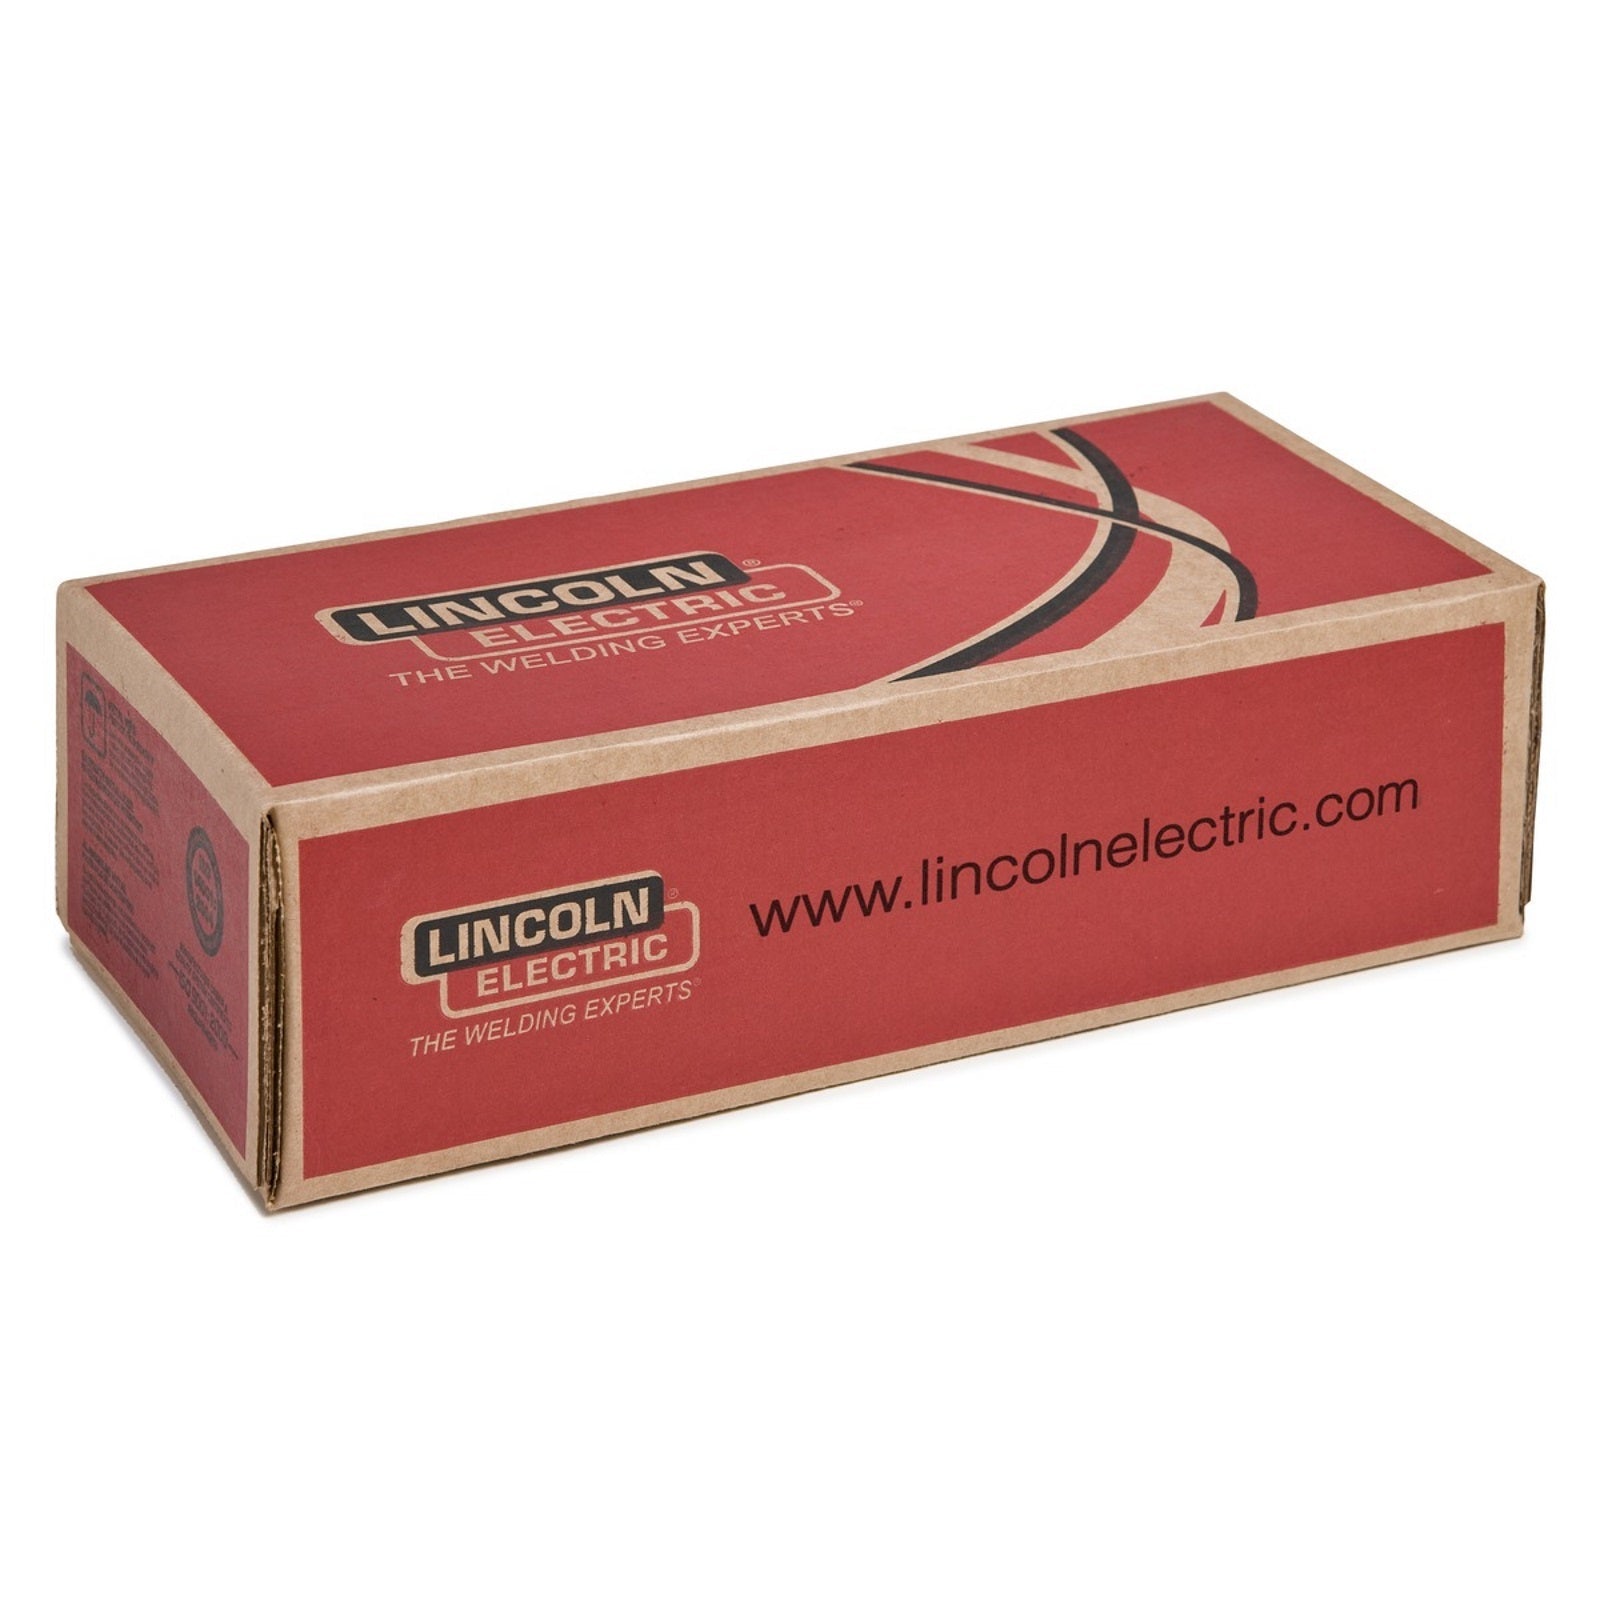 Lincoln Jetweld 1 (7024) 5/32 inch Electrode 50lb Carton (ED010372)